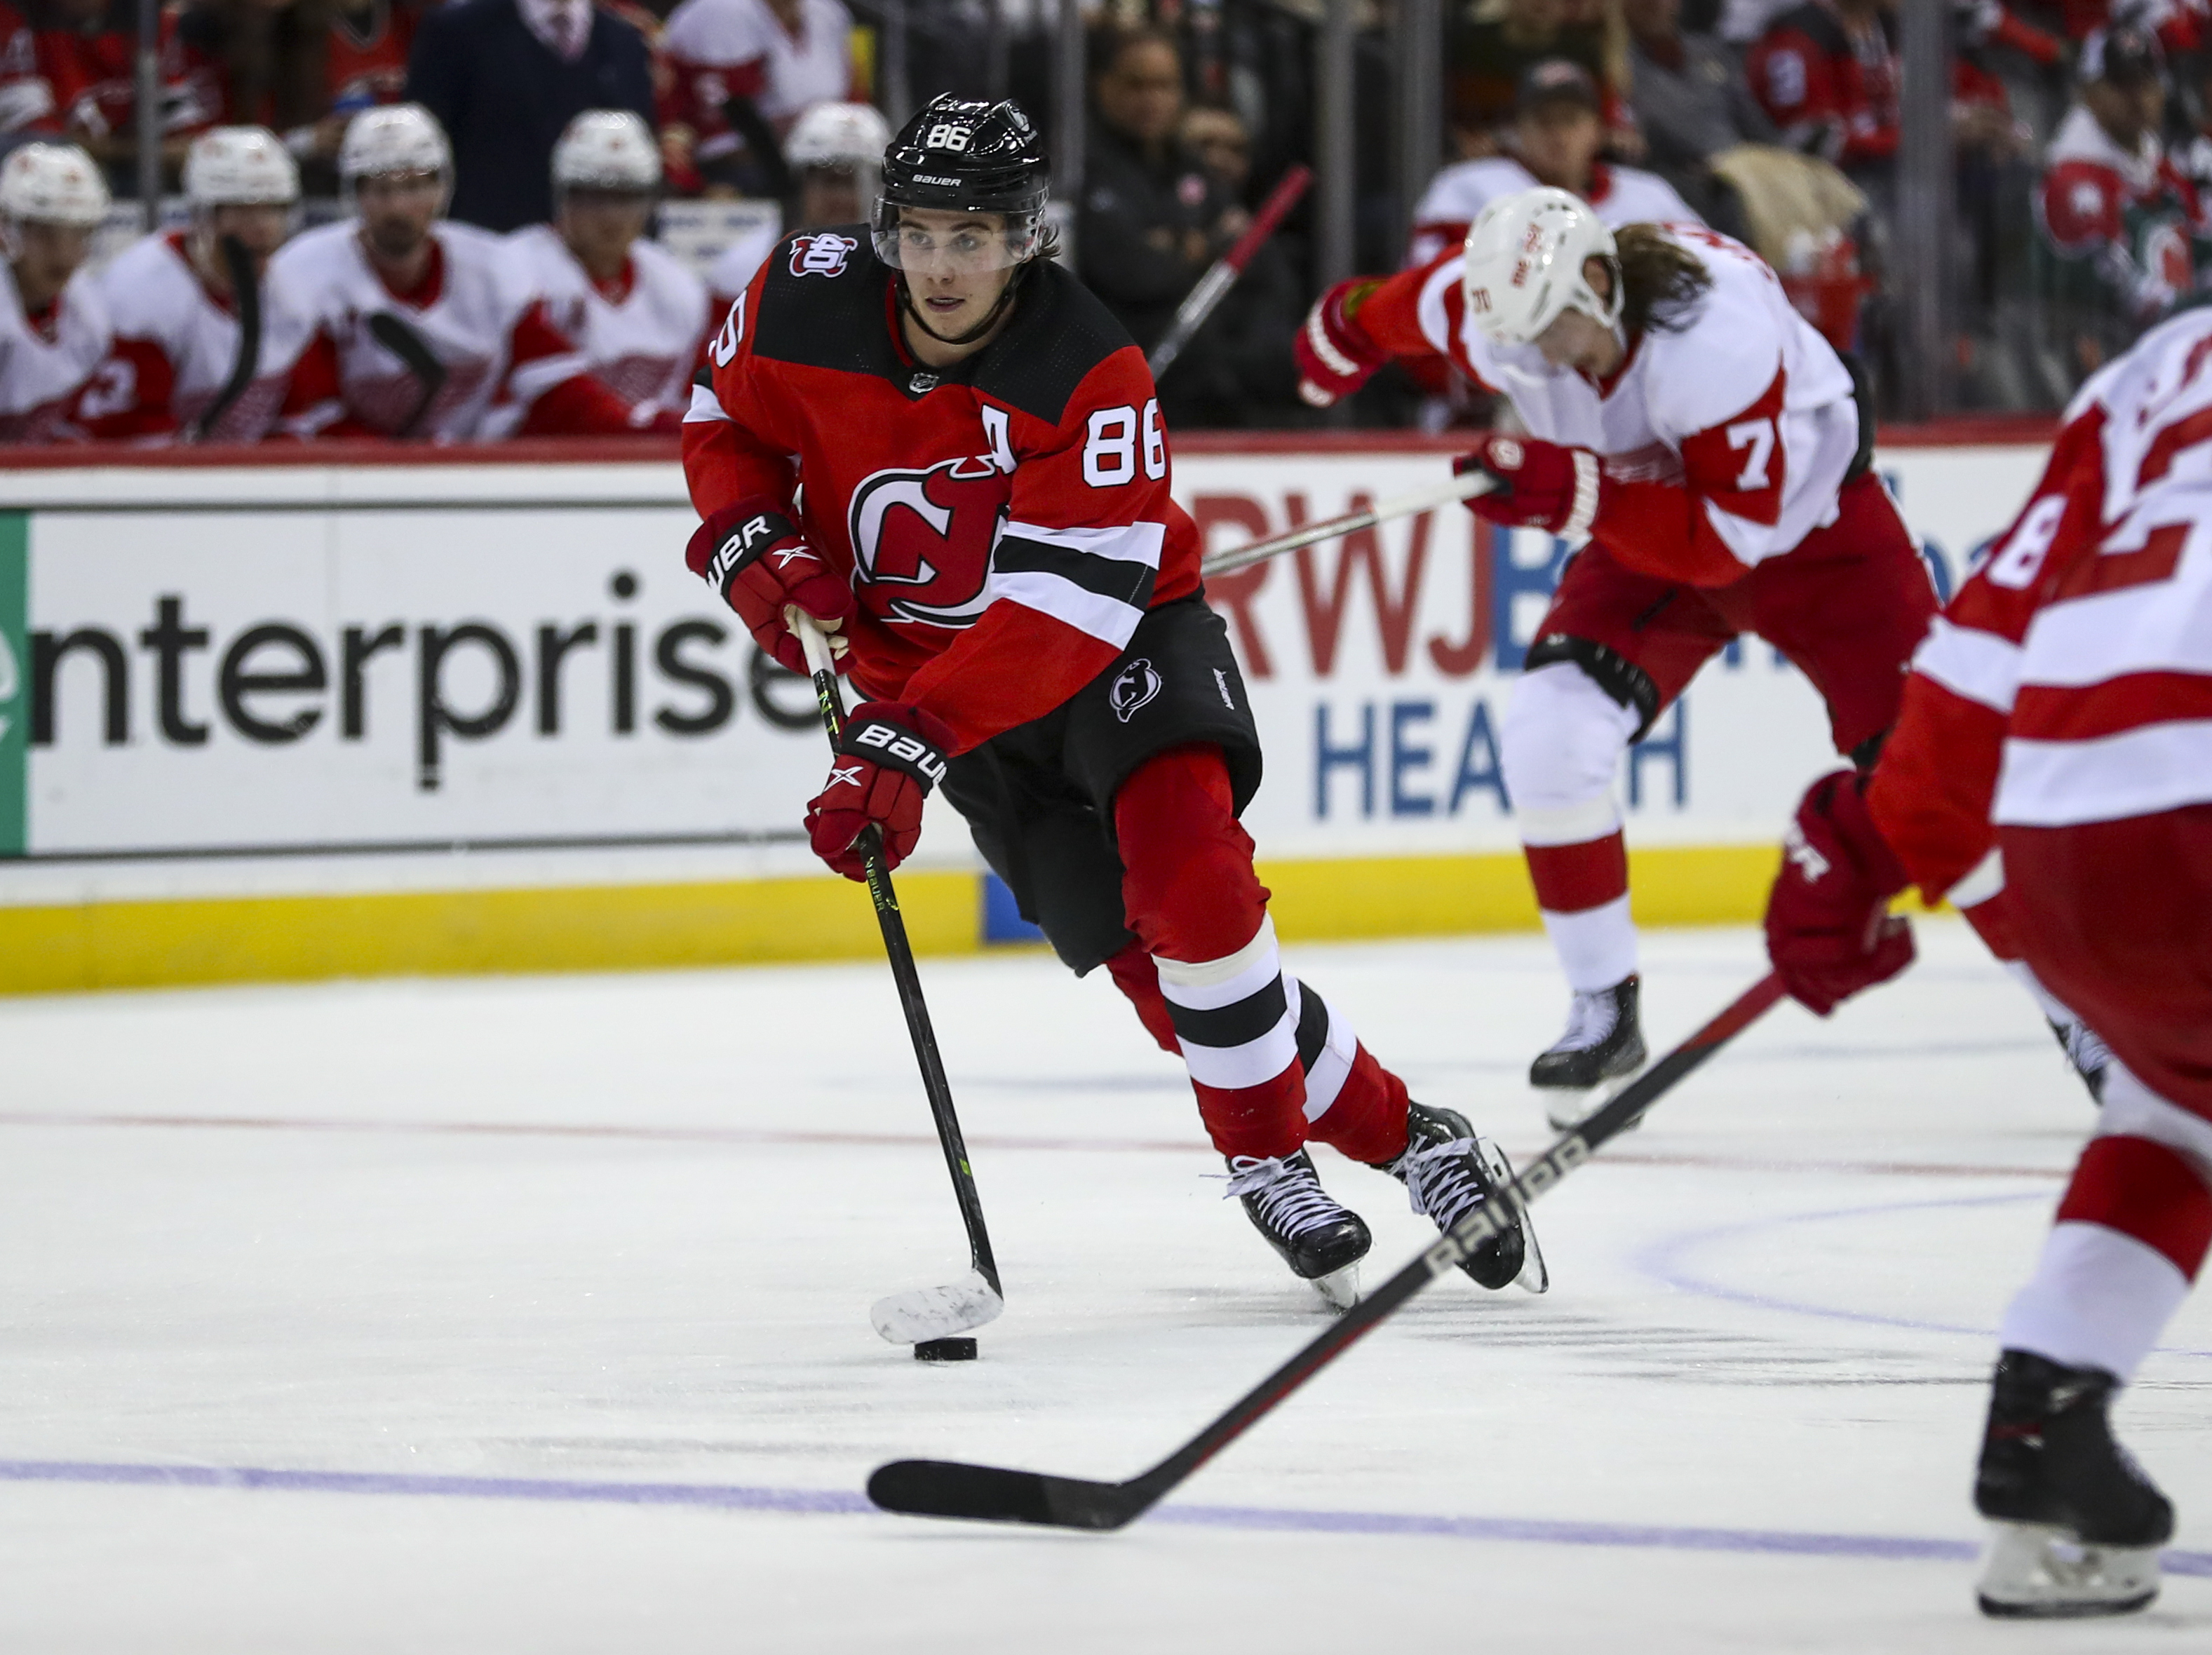 NJ Devils All-Star Jack Hughes out with upper-body injury - The